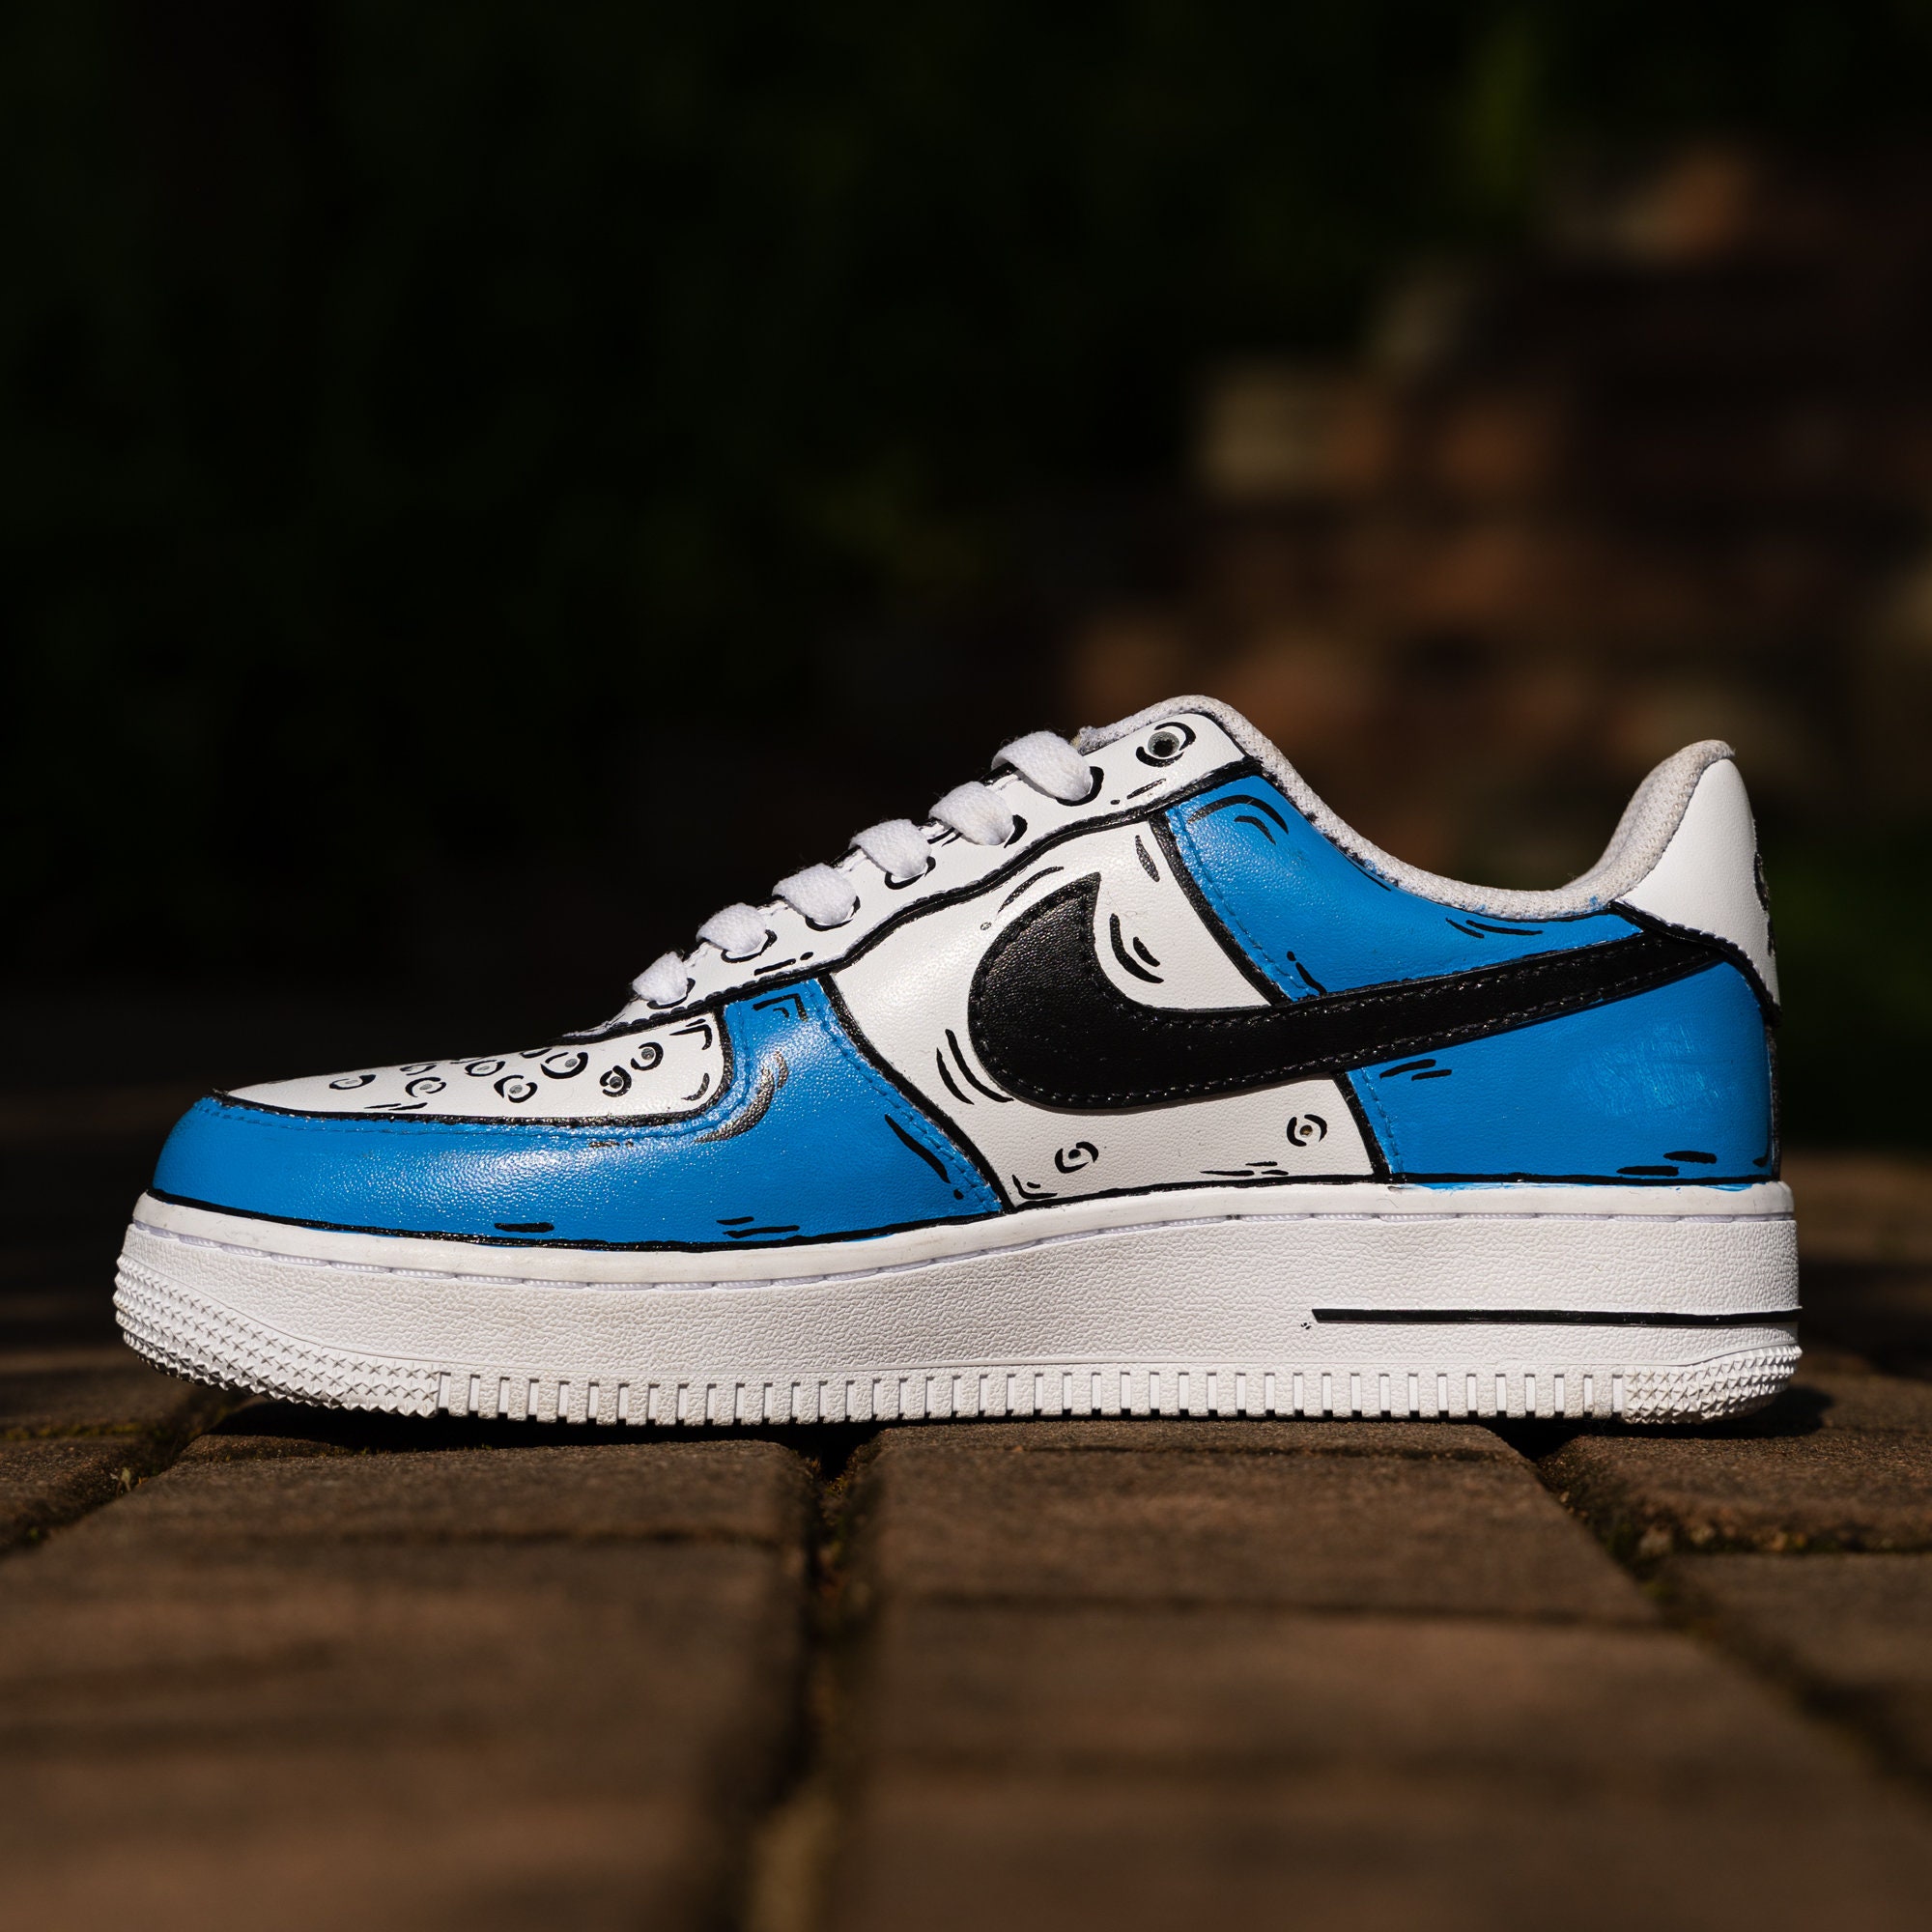 These Two Nike Air Force 1 Lows Change Colour in the Heat and Cold |